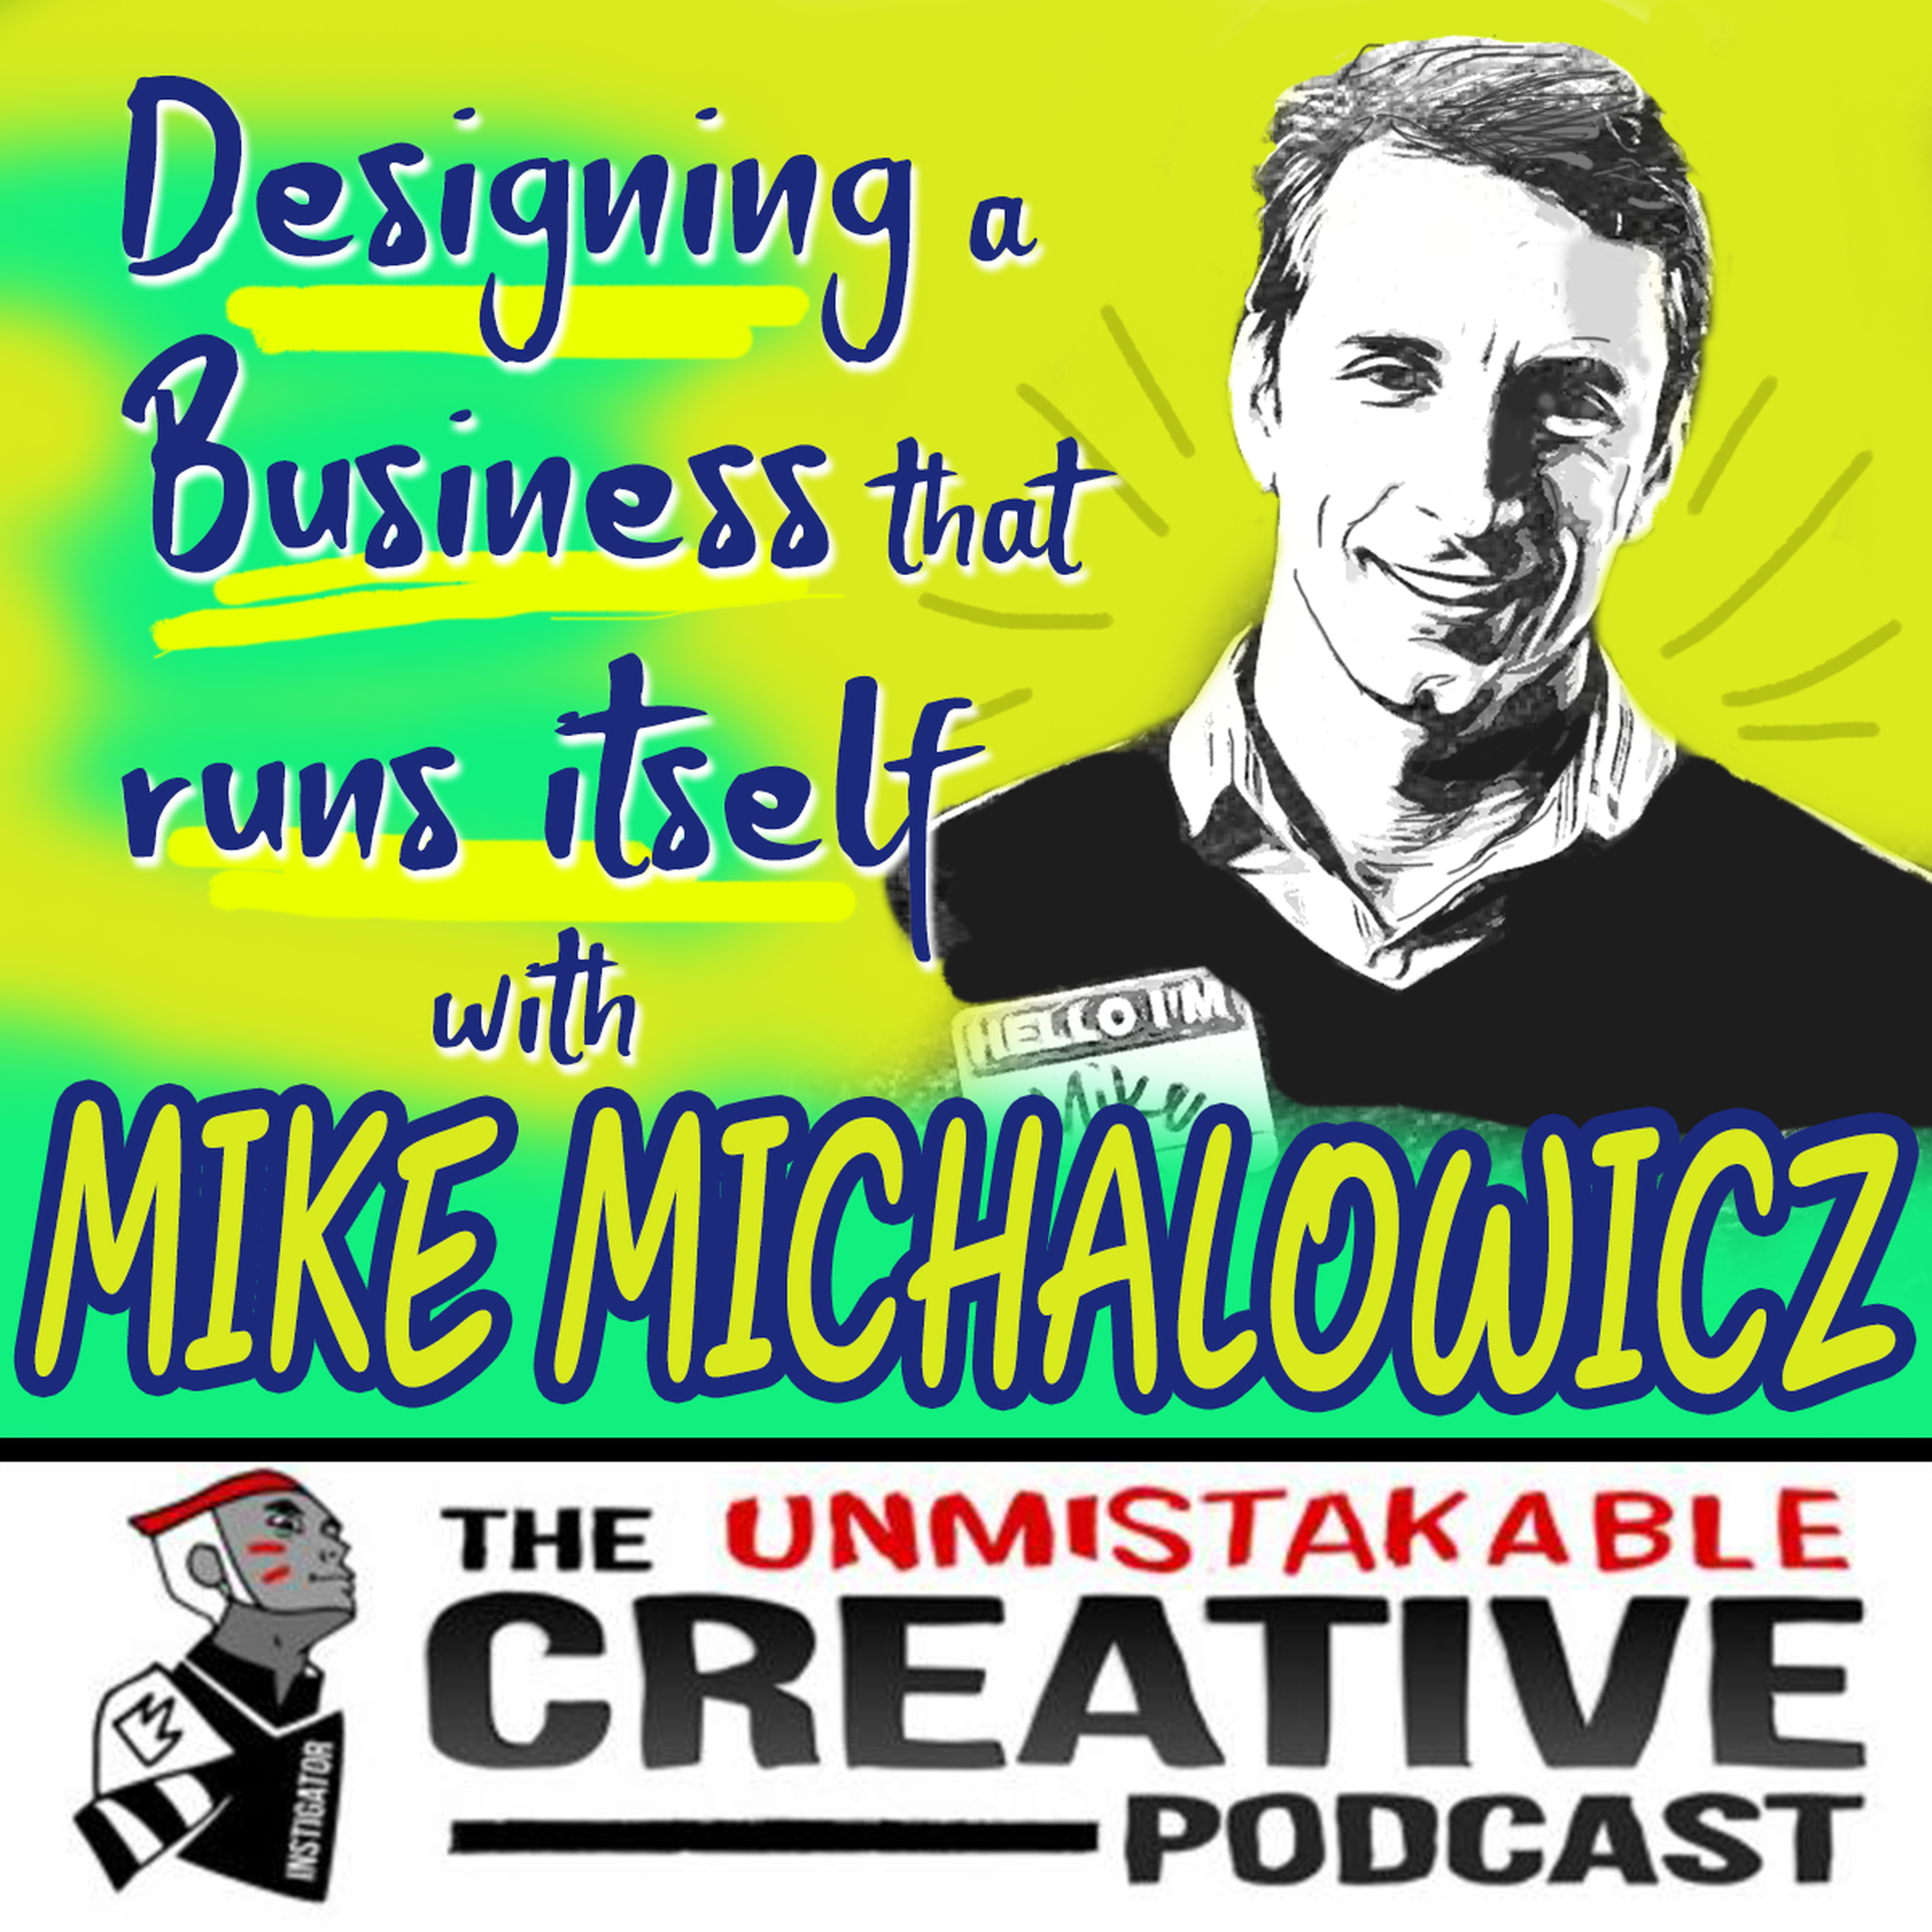 Designing a Business that runs itself with Mike Michalowicz